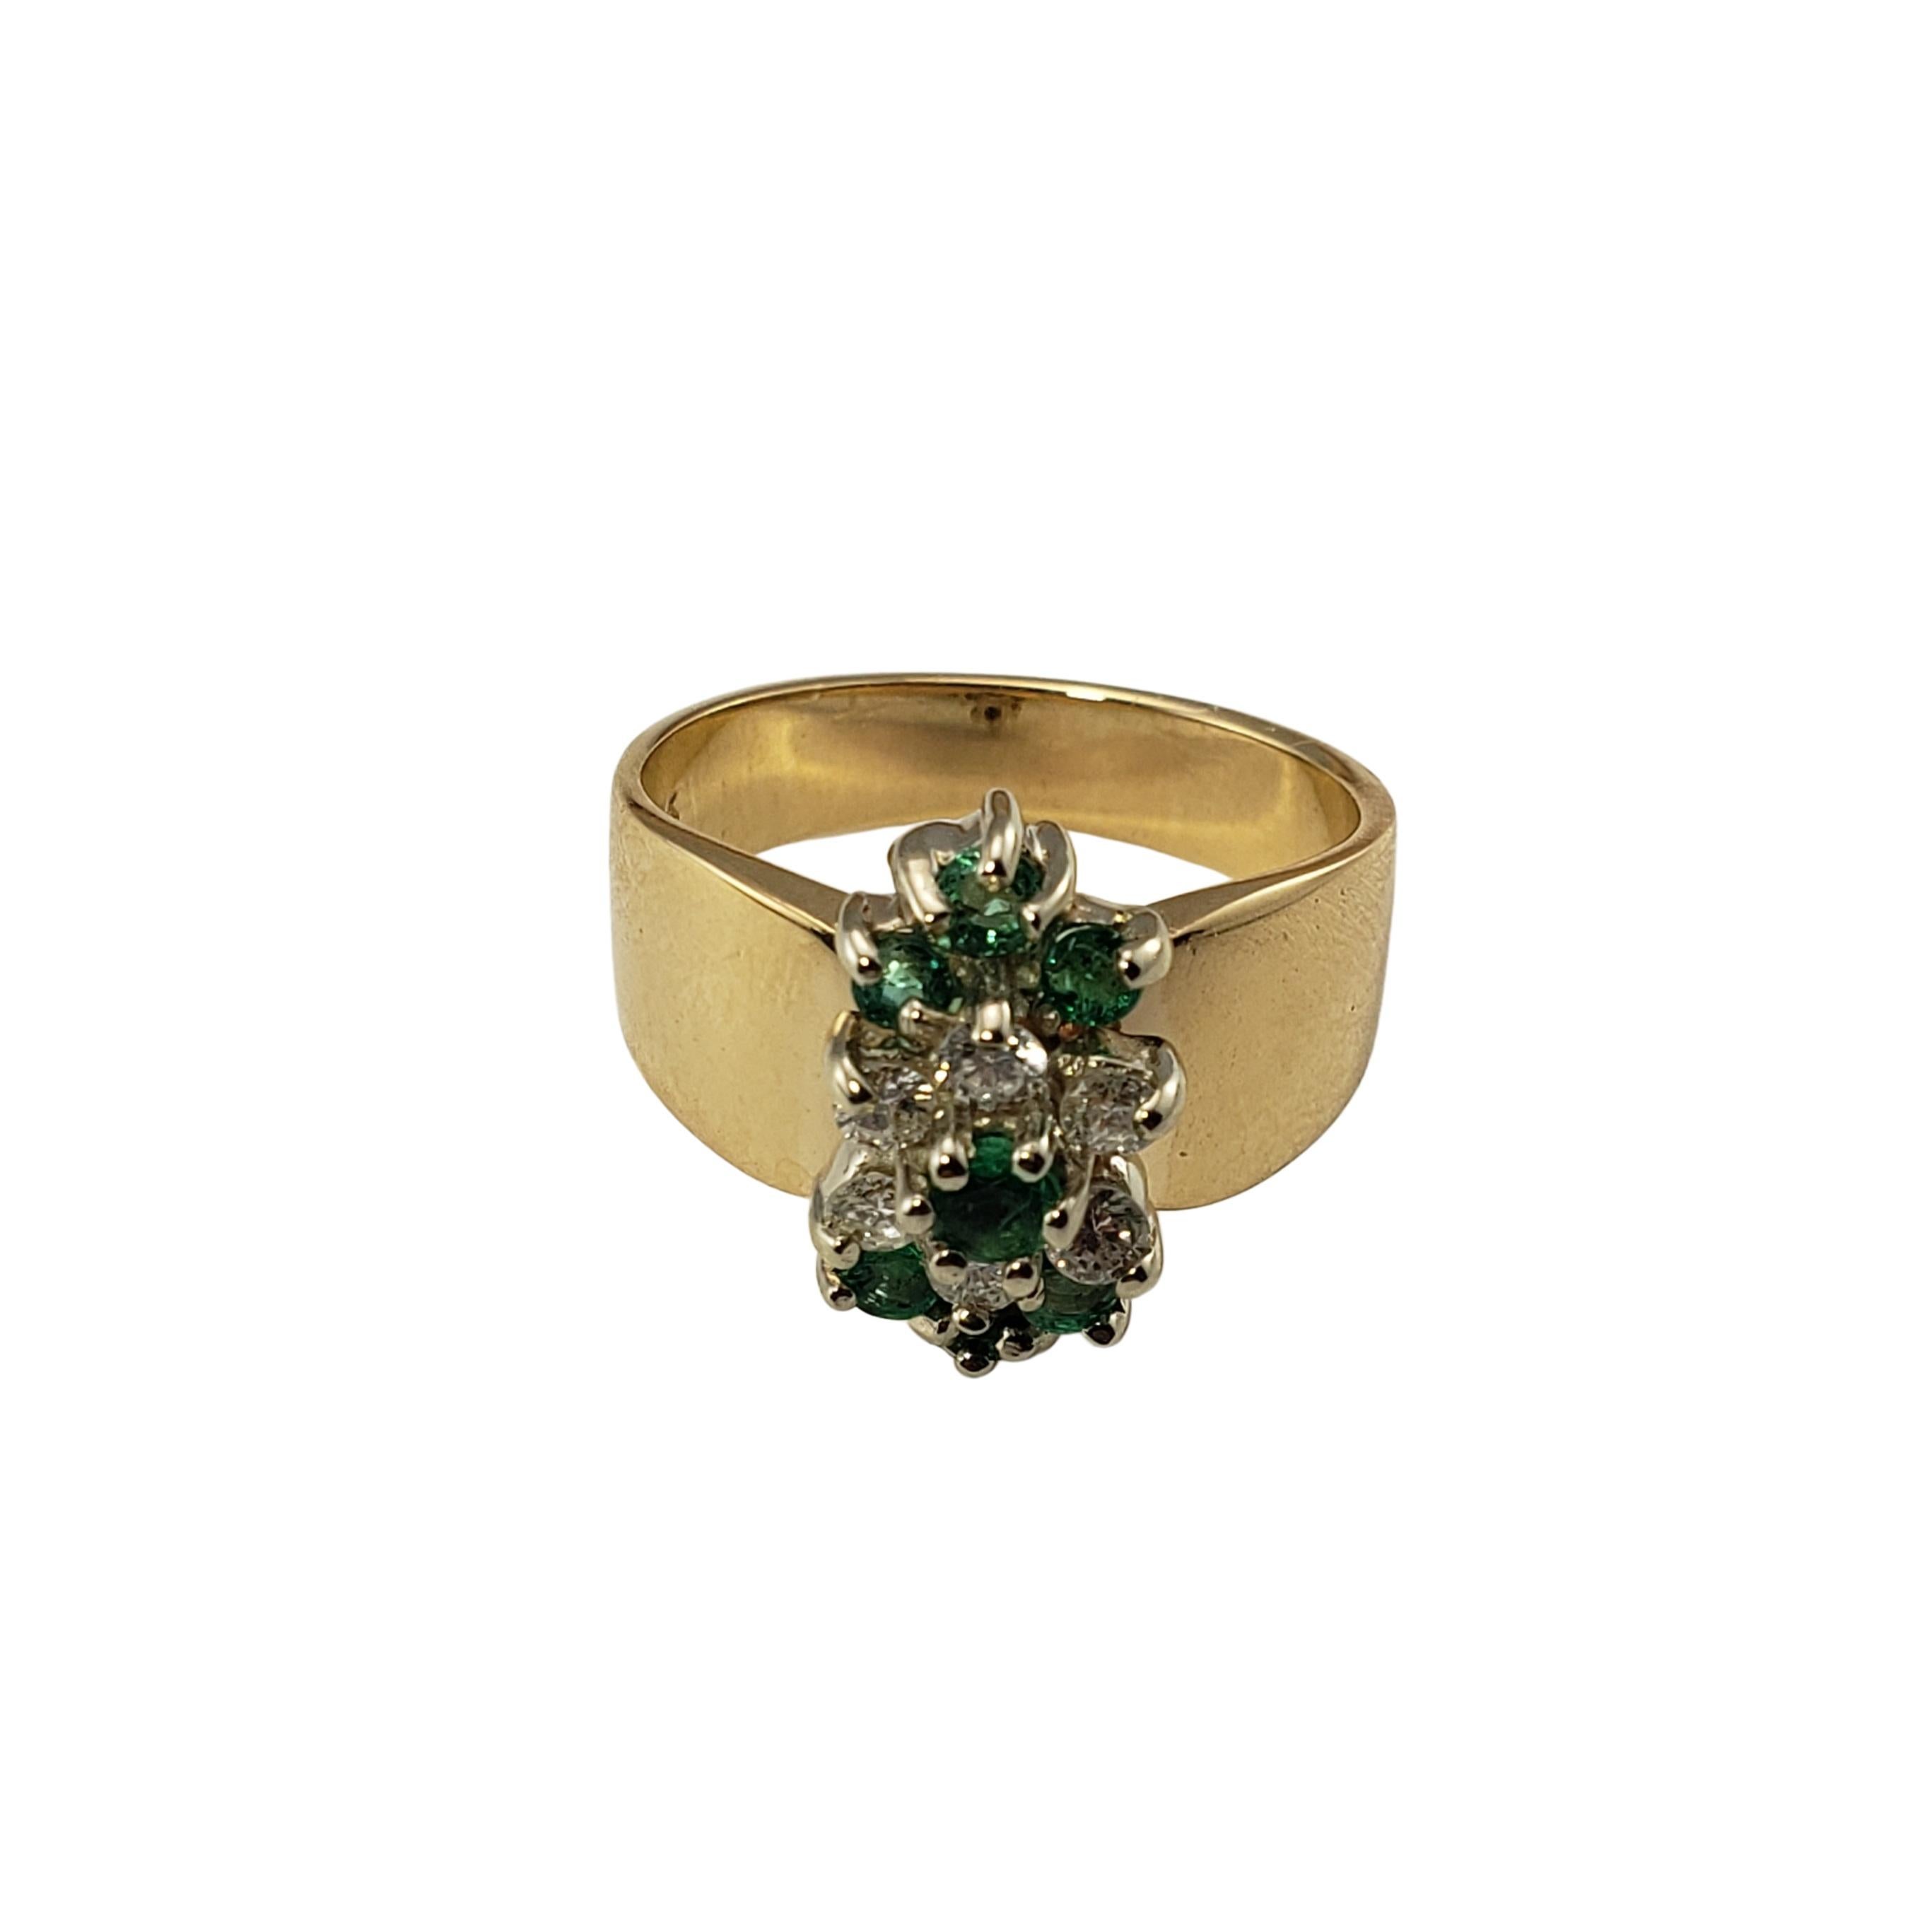 Vintage 14 Karat Yellow Gold Diamond and Natural Emerald Ring Size 6.25-

This lovely ring features six round brilliant cut diamonds and seven emeralds set in polished 14K yellow gold.  Width:  15 mm.
Shank:  4 mm.

Approximate total diamond weight: